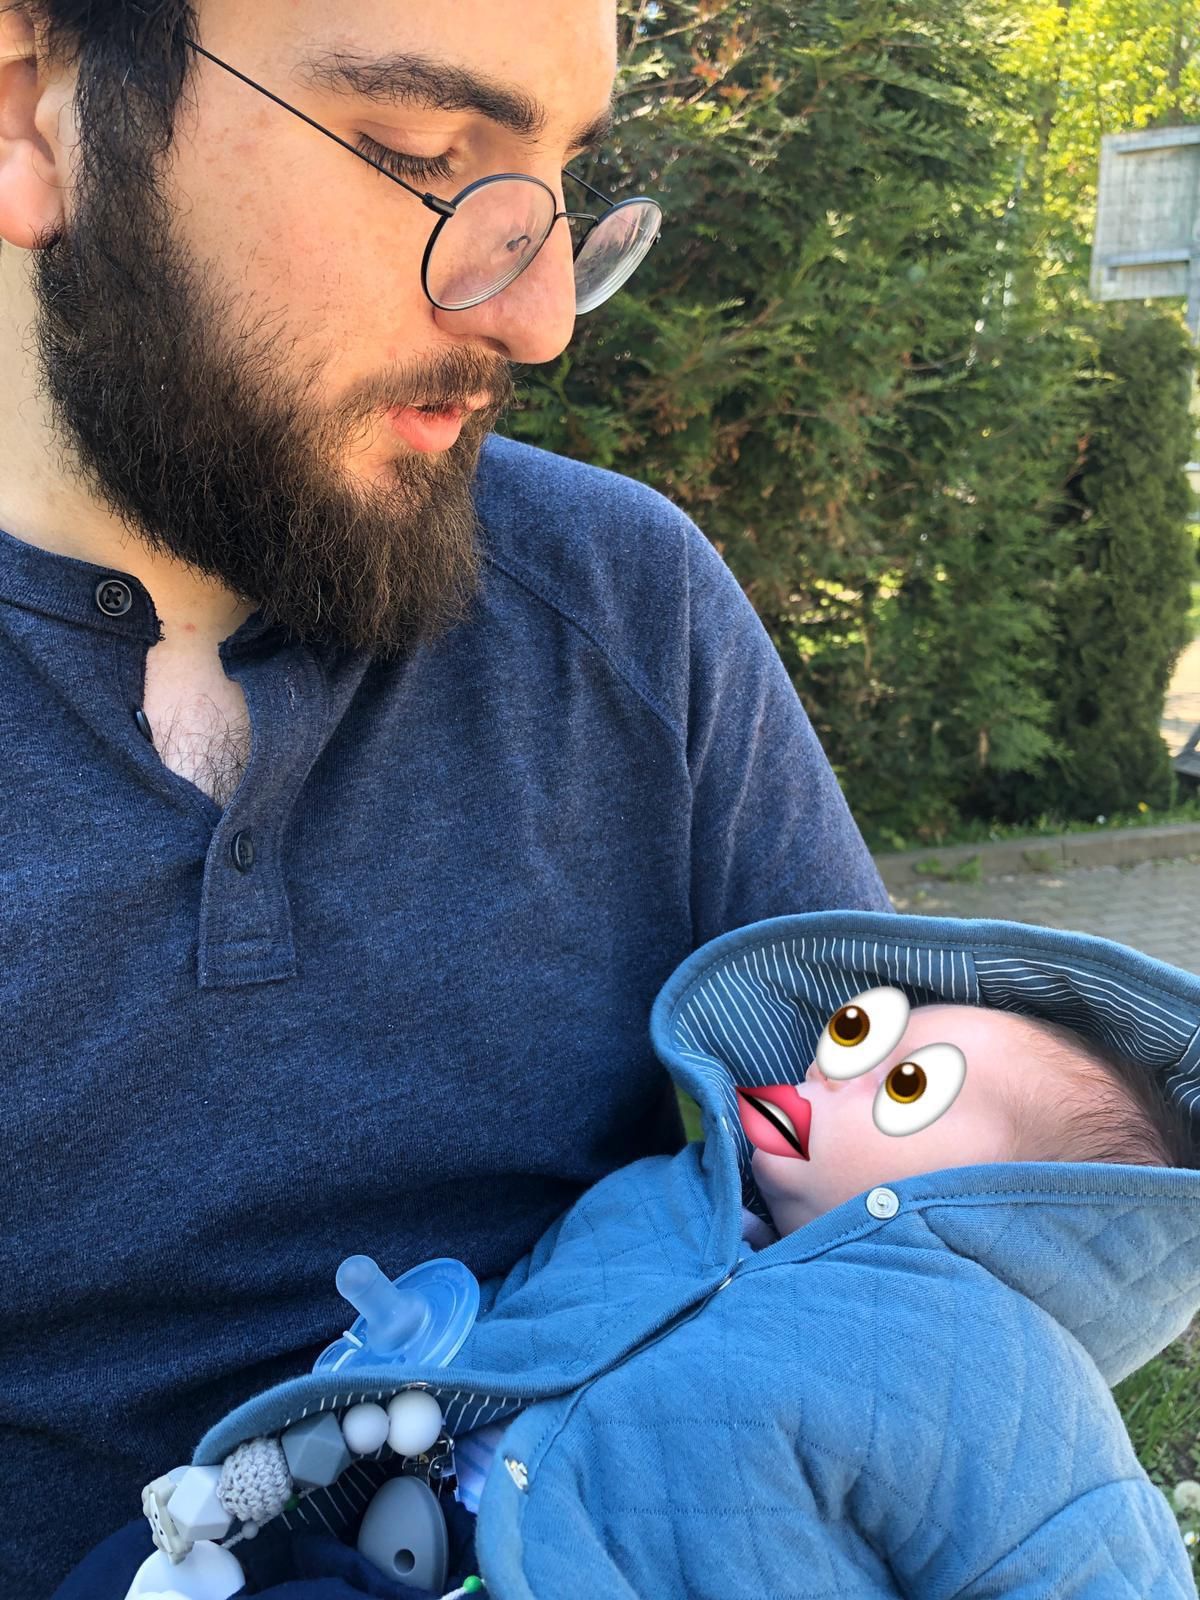 My wife doesn’t want our newborn son’s face posted on social media, so she asked me to censor over it. Needless to say, I won’t be asked to do that again.